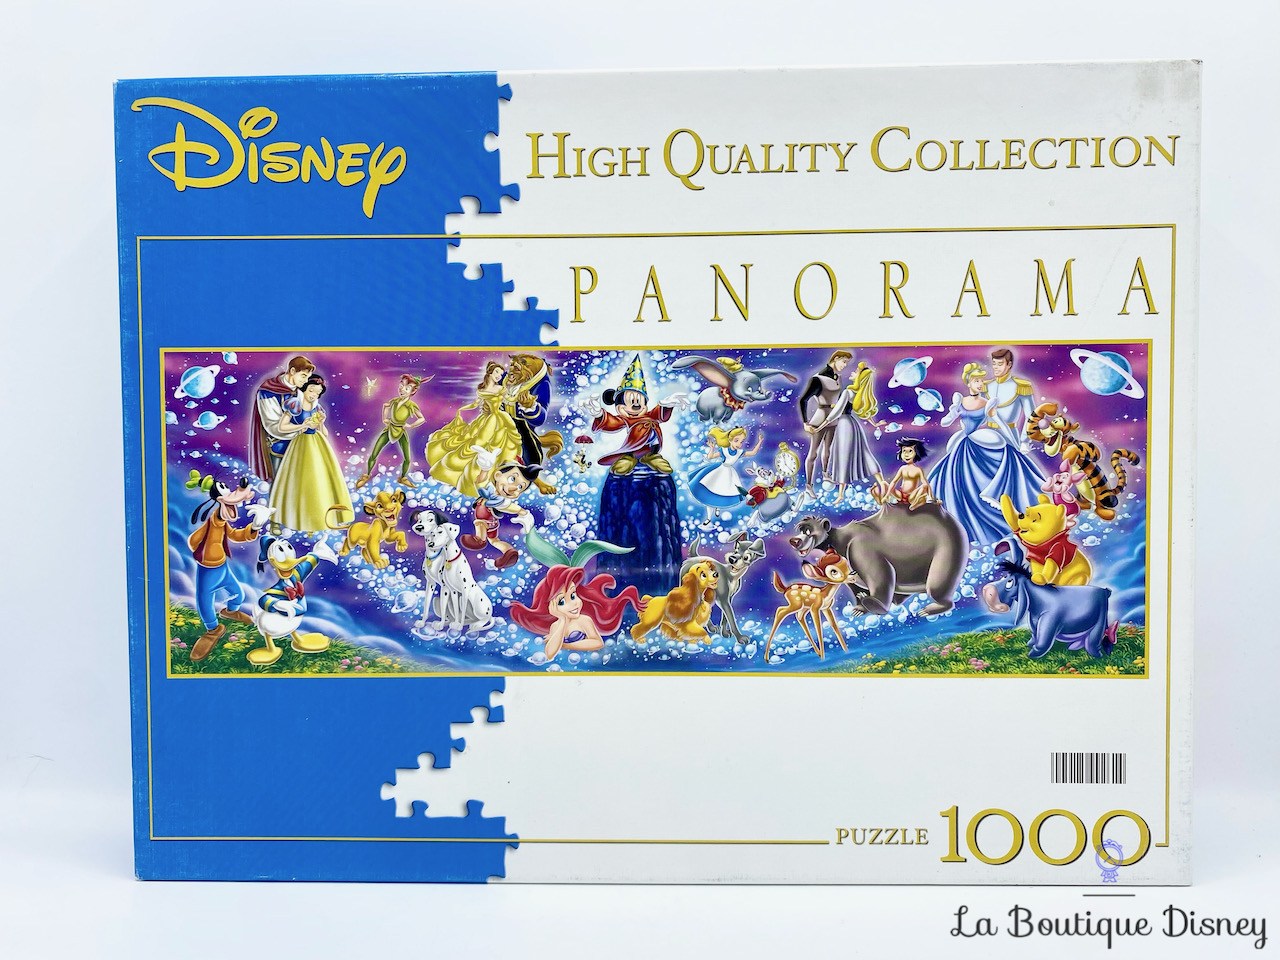 Puzzle Panorama 1000 Pièces Disney Family Clementoni N°99261 multi  personnages High Quality Collection